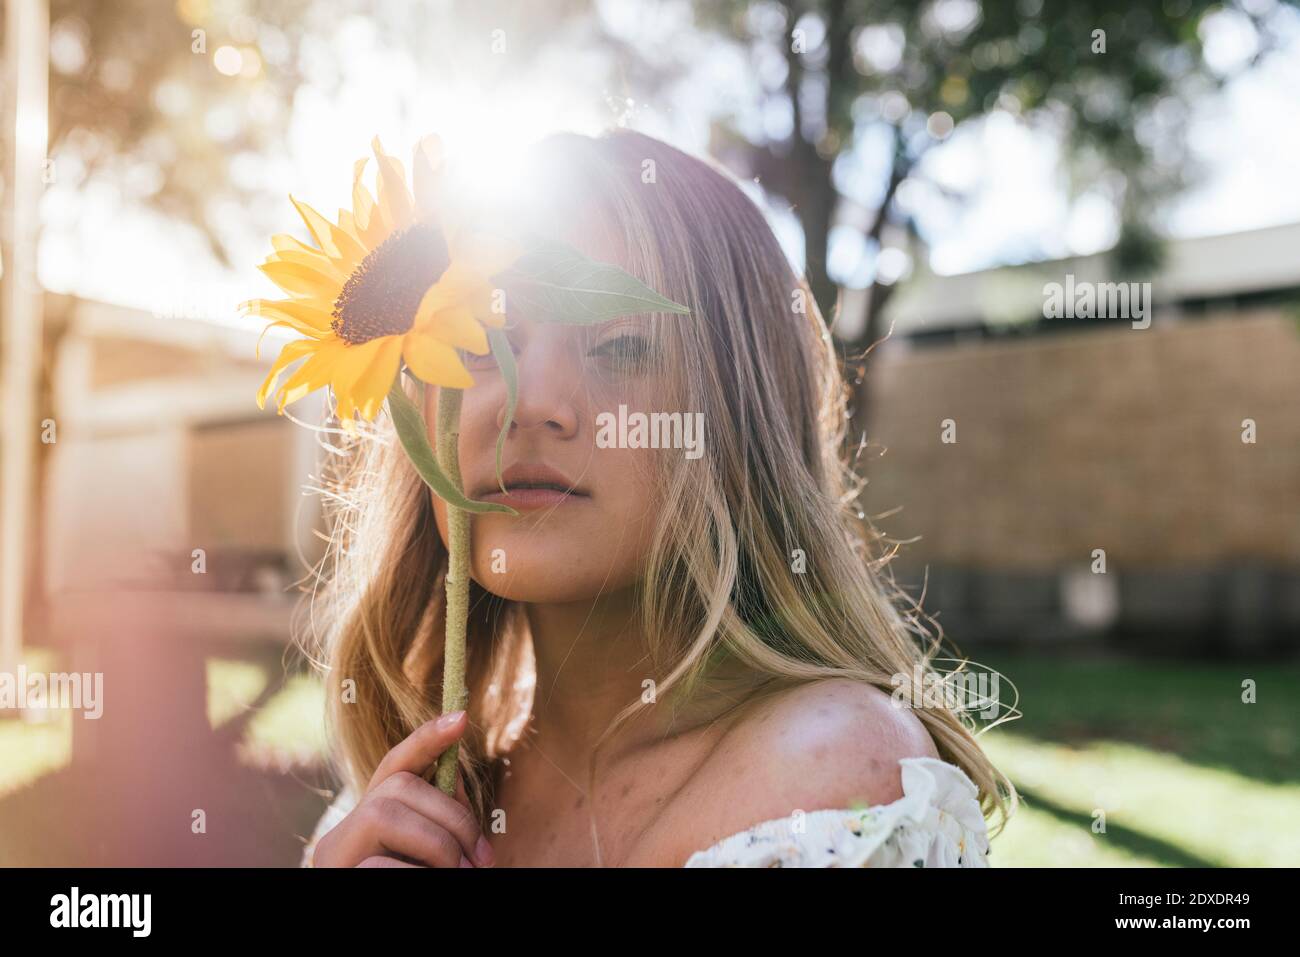 Young woman covering face with sunflower at backyard Stock Photo